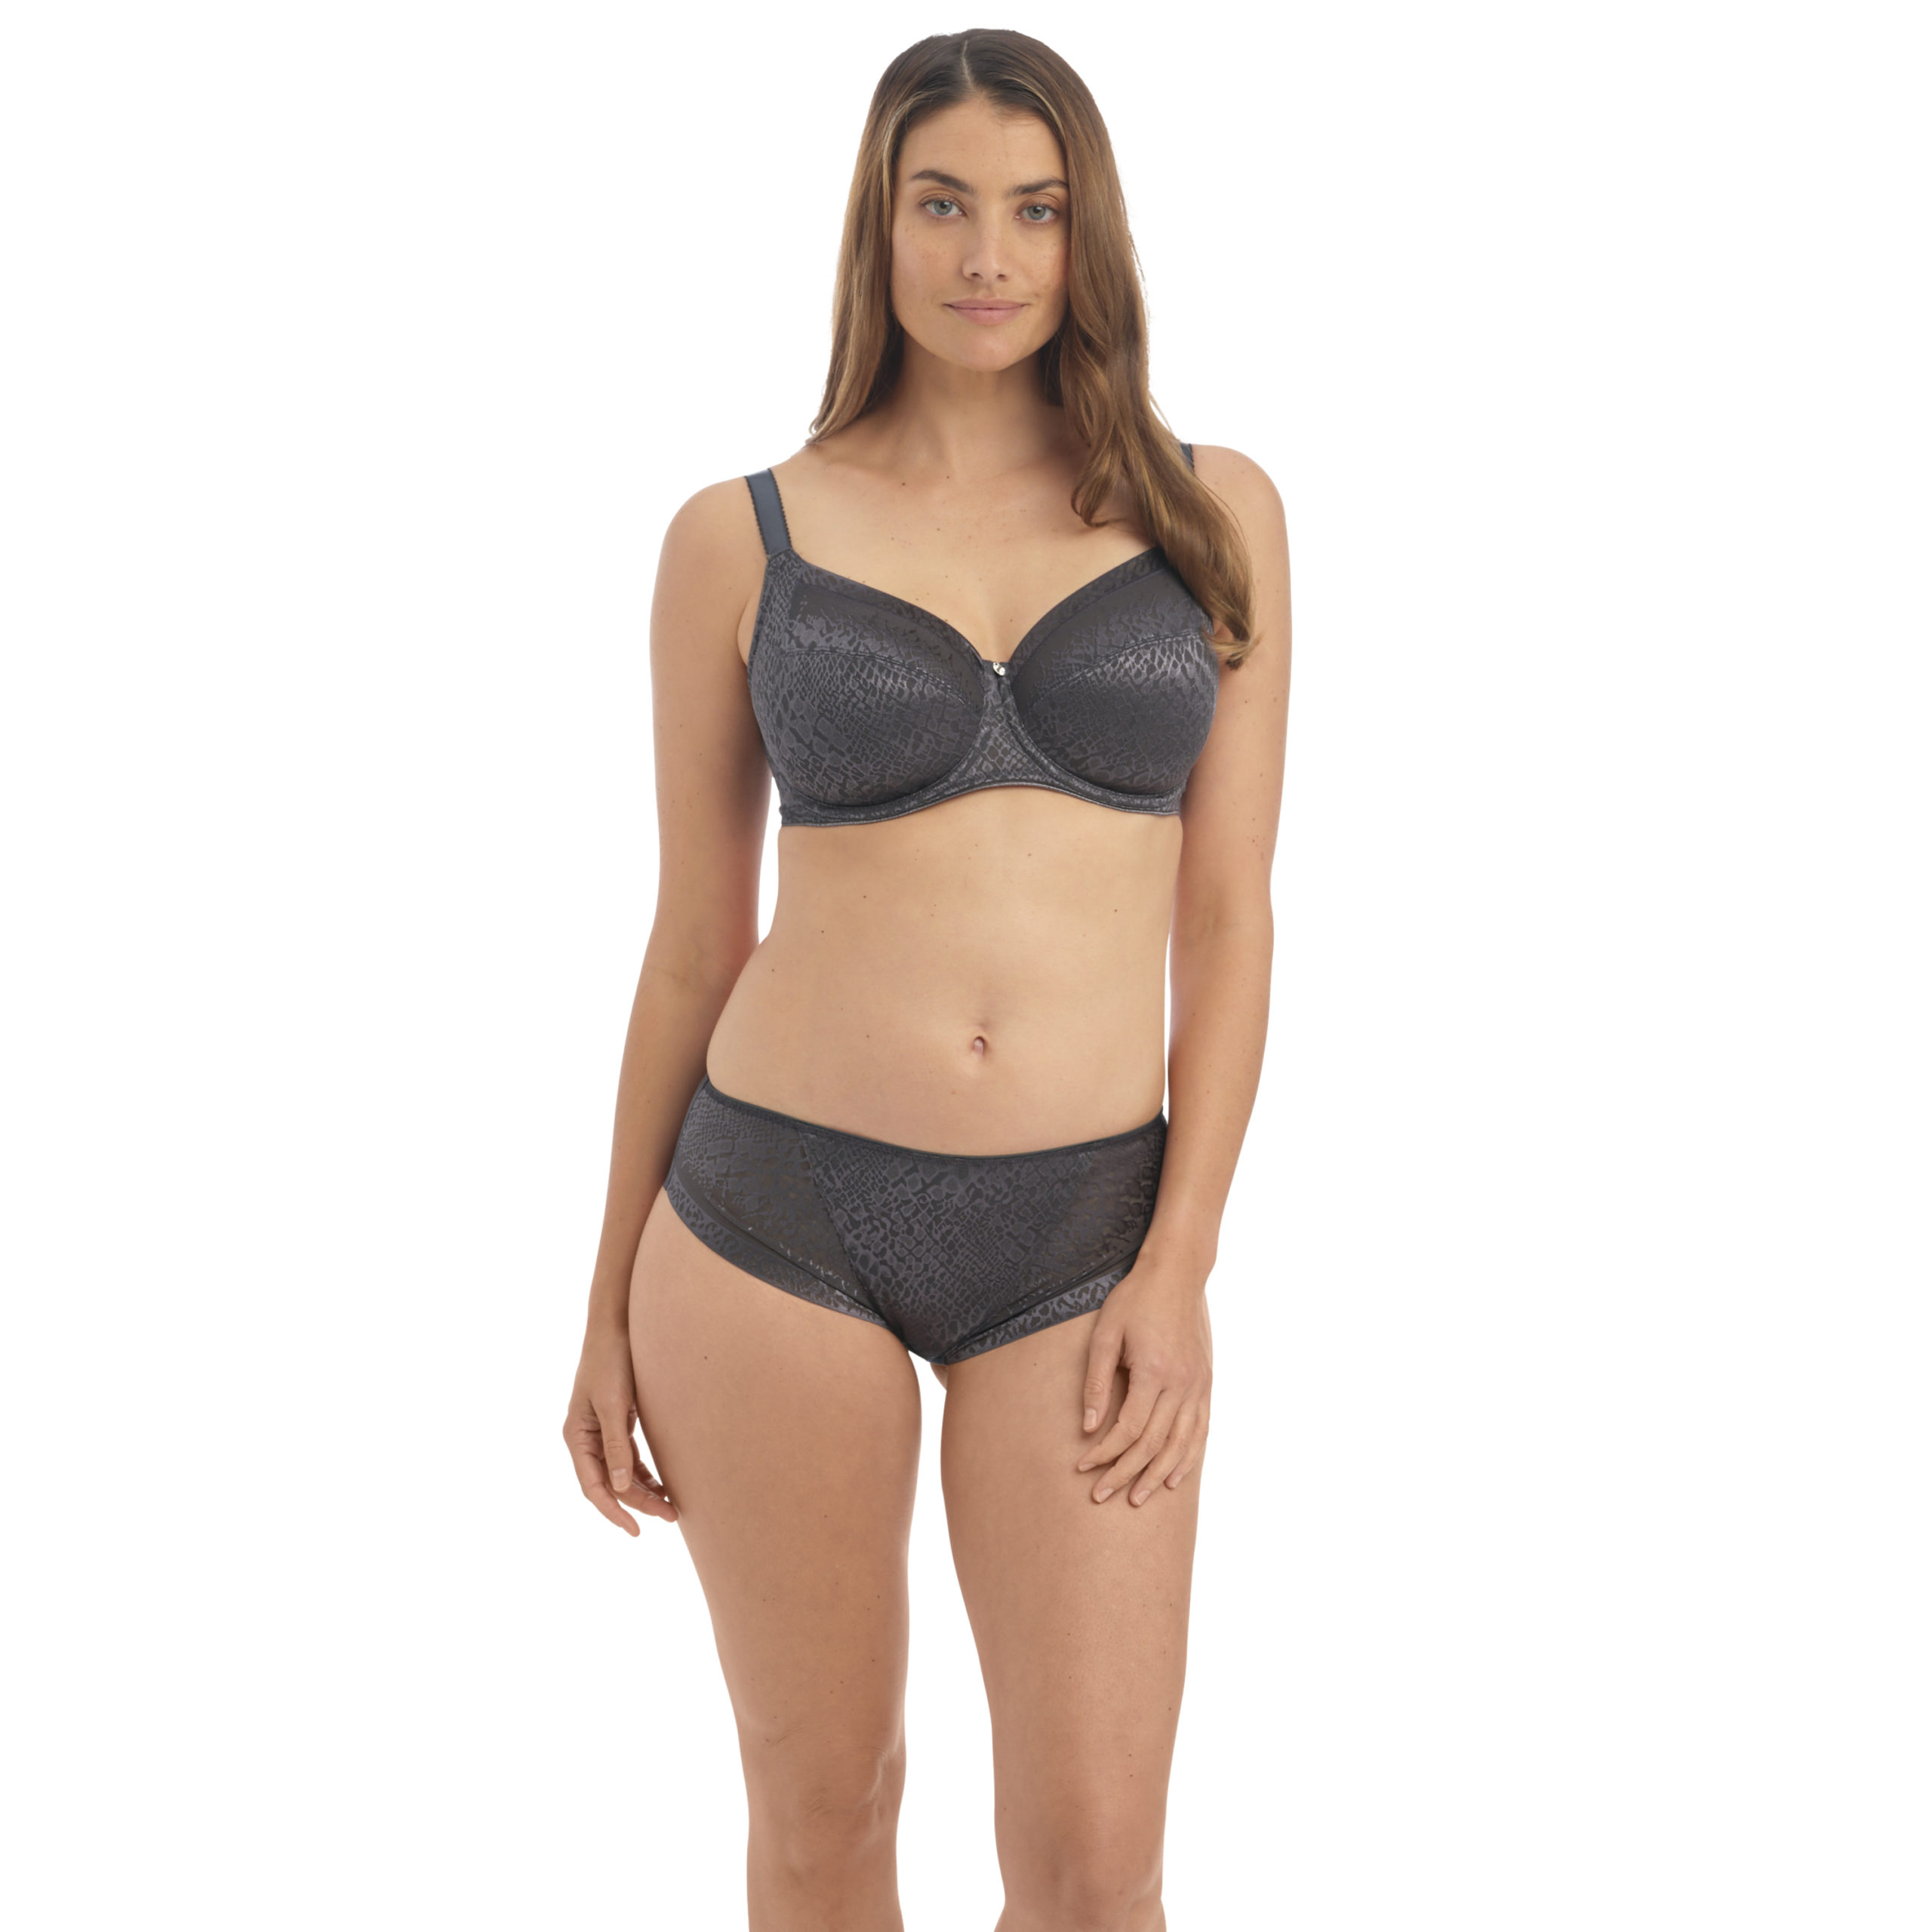 with underwire with sealed cup, brazilian briefs s krughevom Leilieve 51296  - buy at